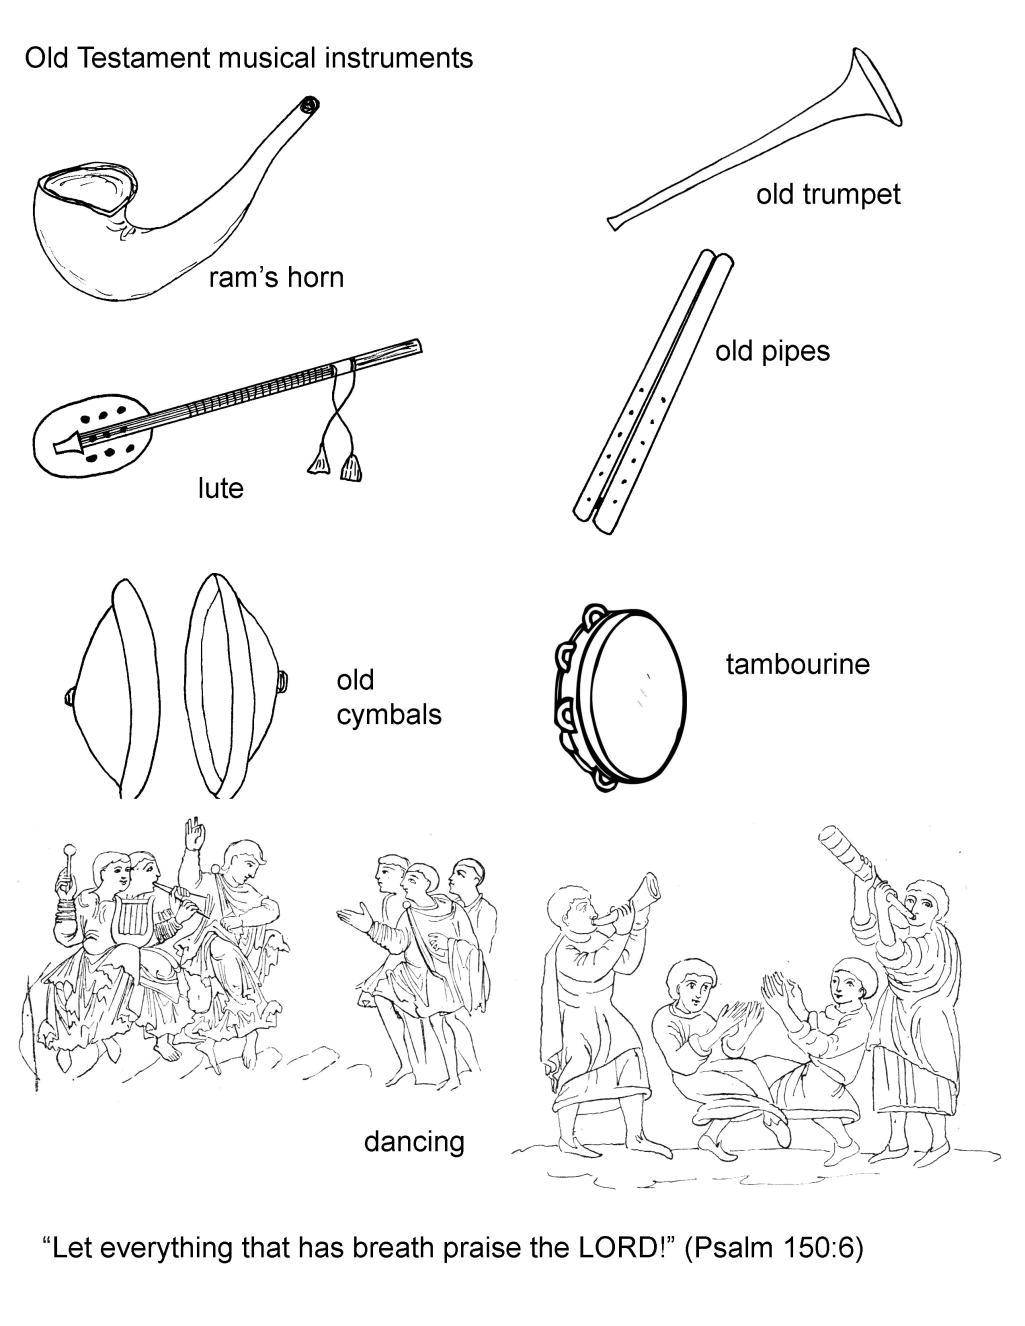 Coloring Musical instruments in English. Category English. Tags:  English.